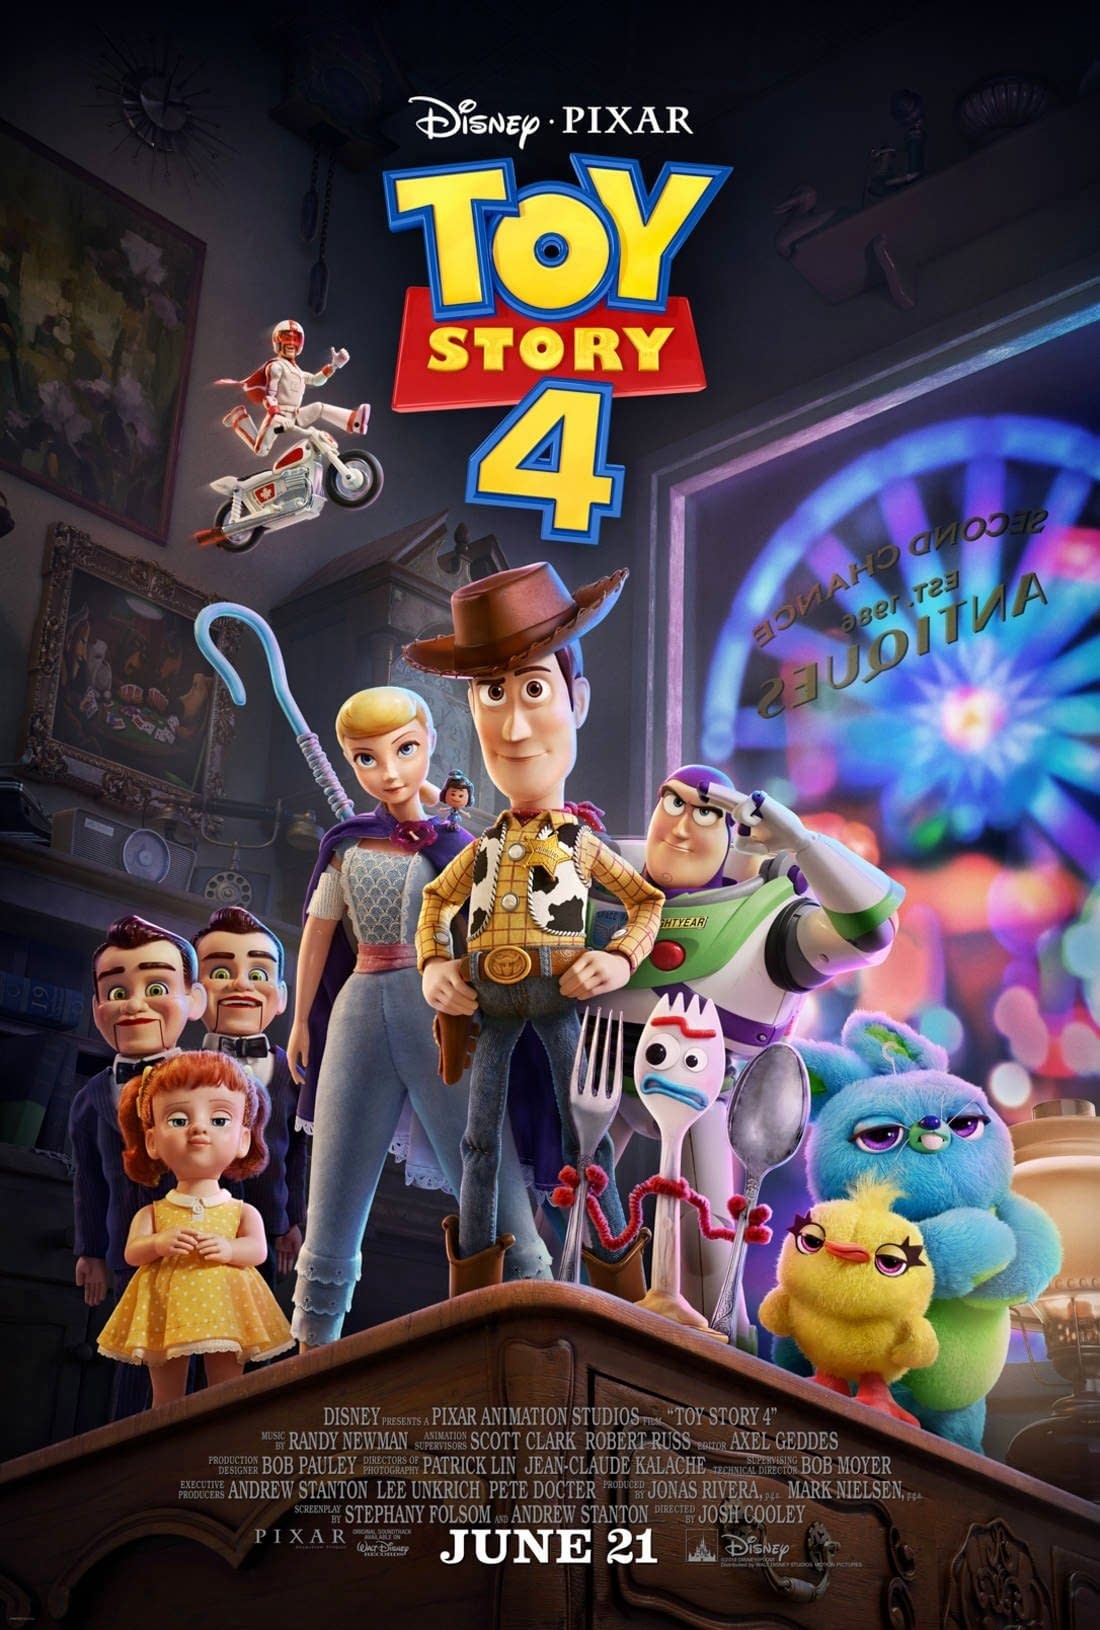 'Toy Story 4': Official Trailer Finds Woody Facing a "Forky" in the Road